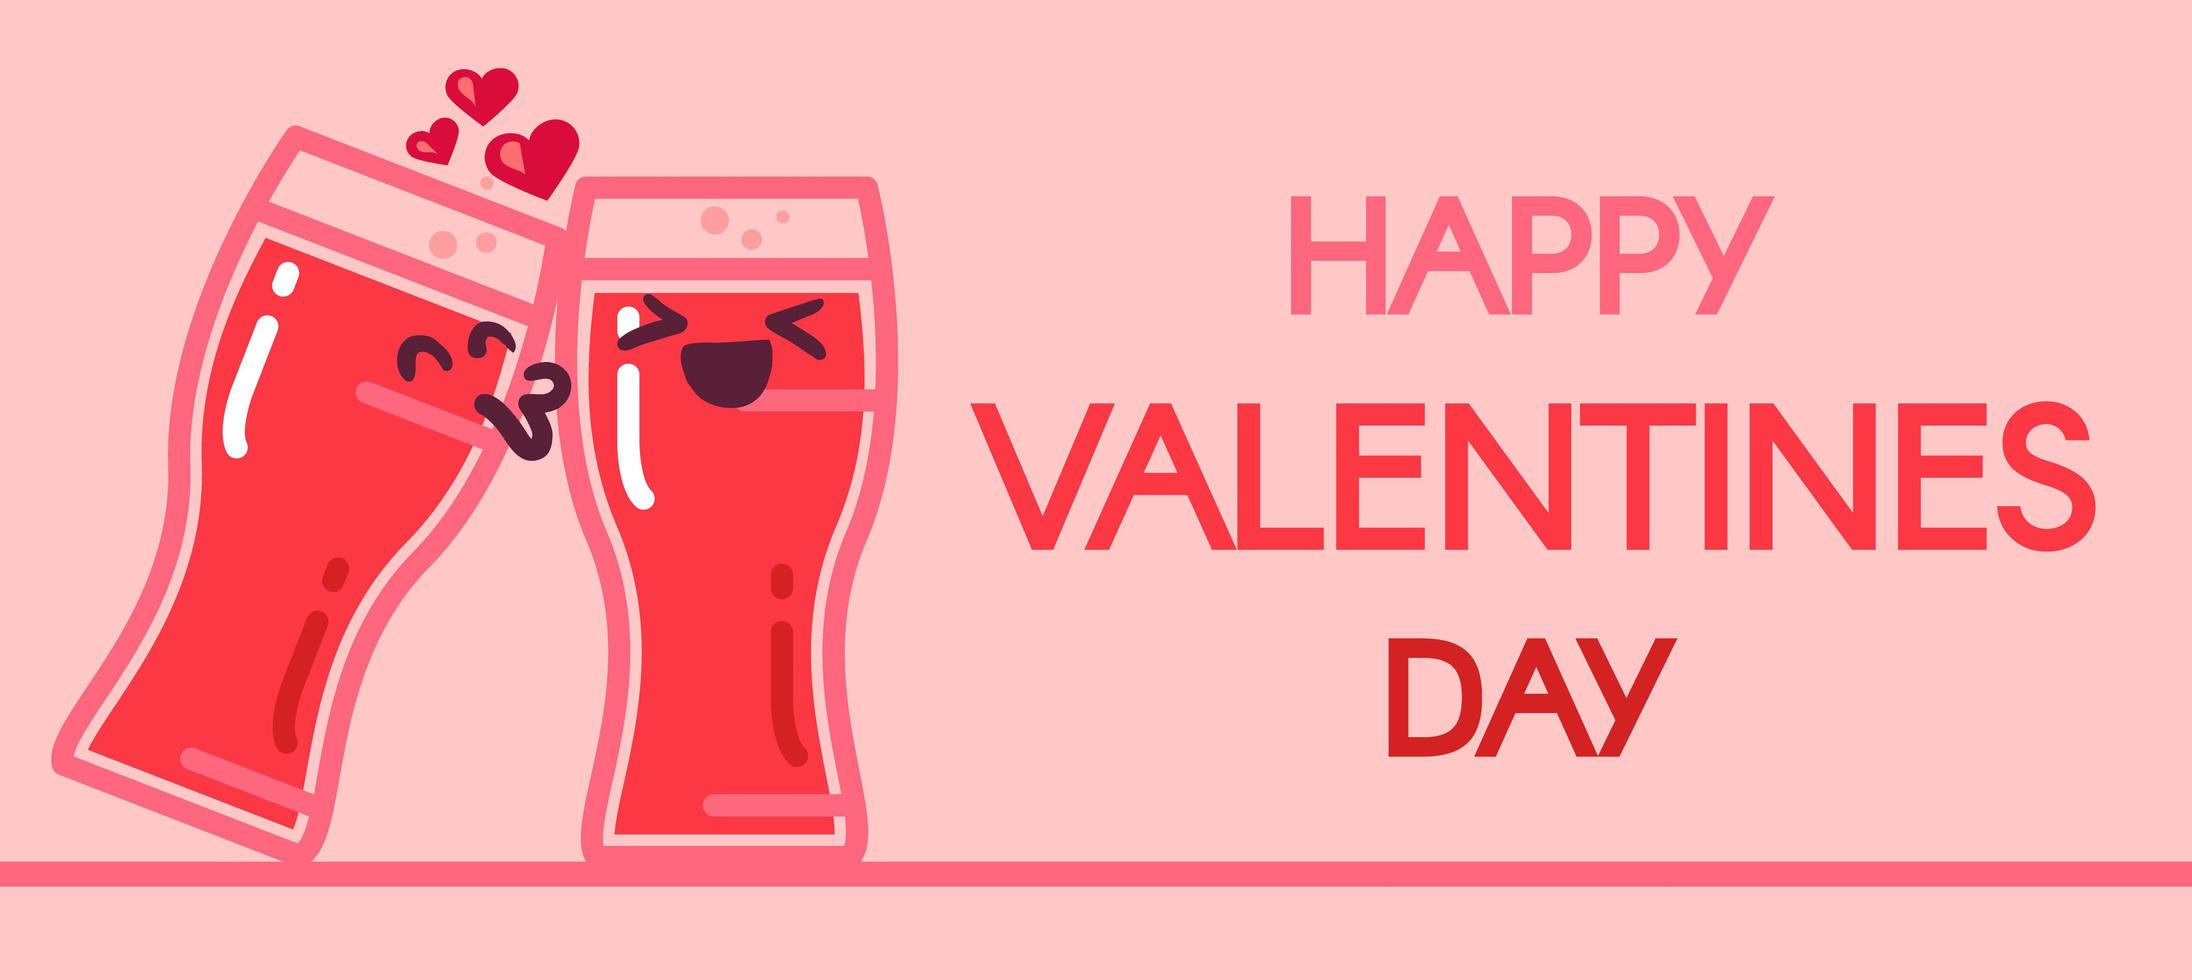 Happy Valentines Day vector banner template